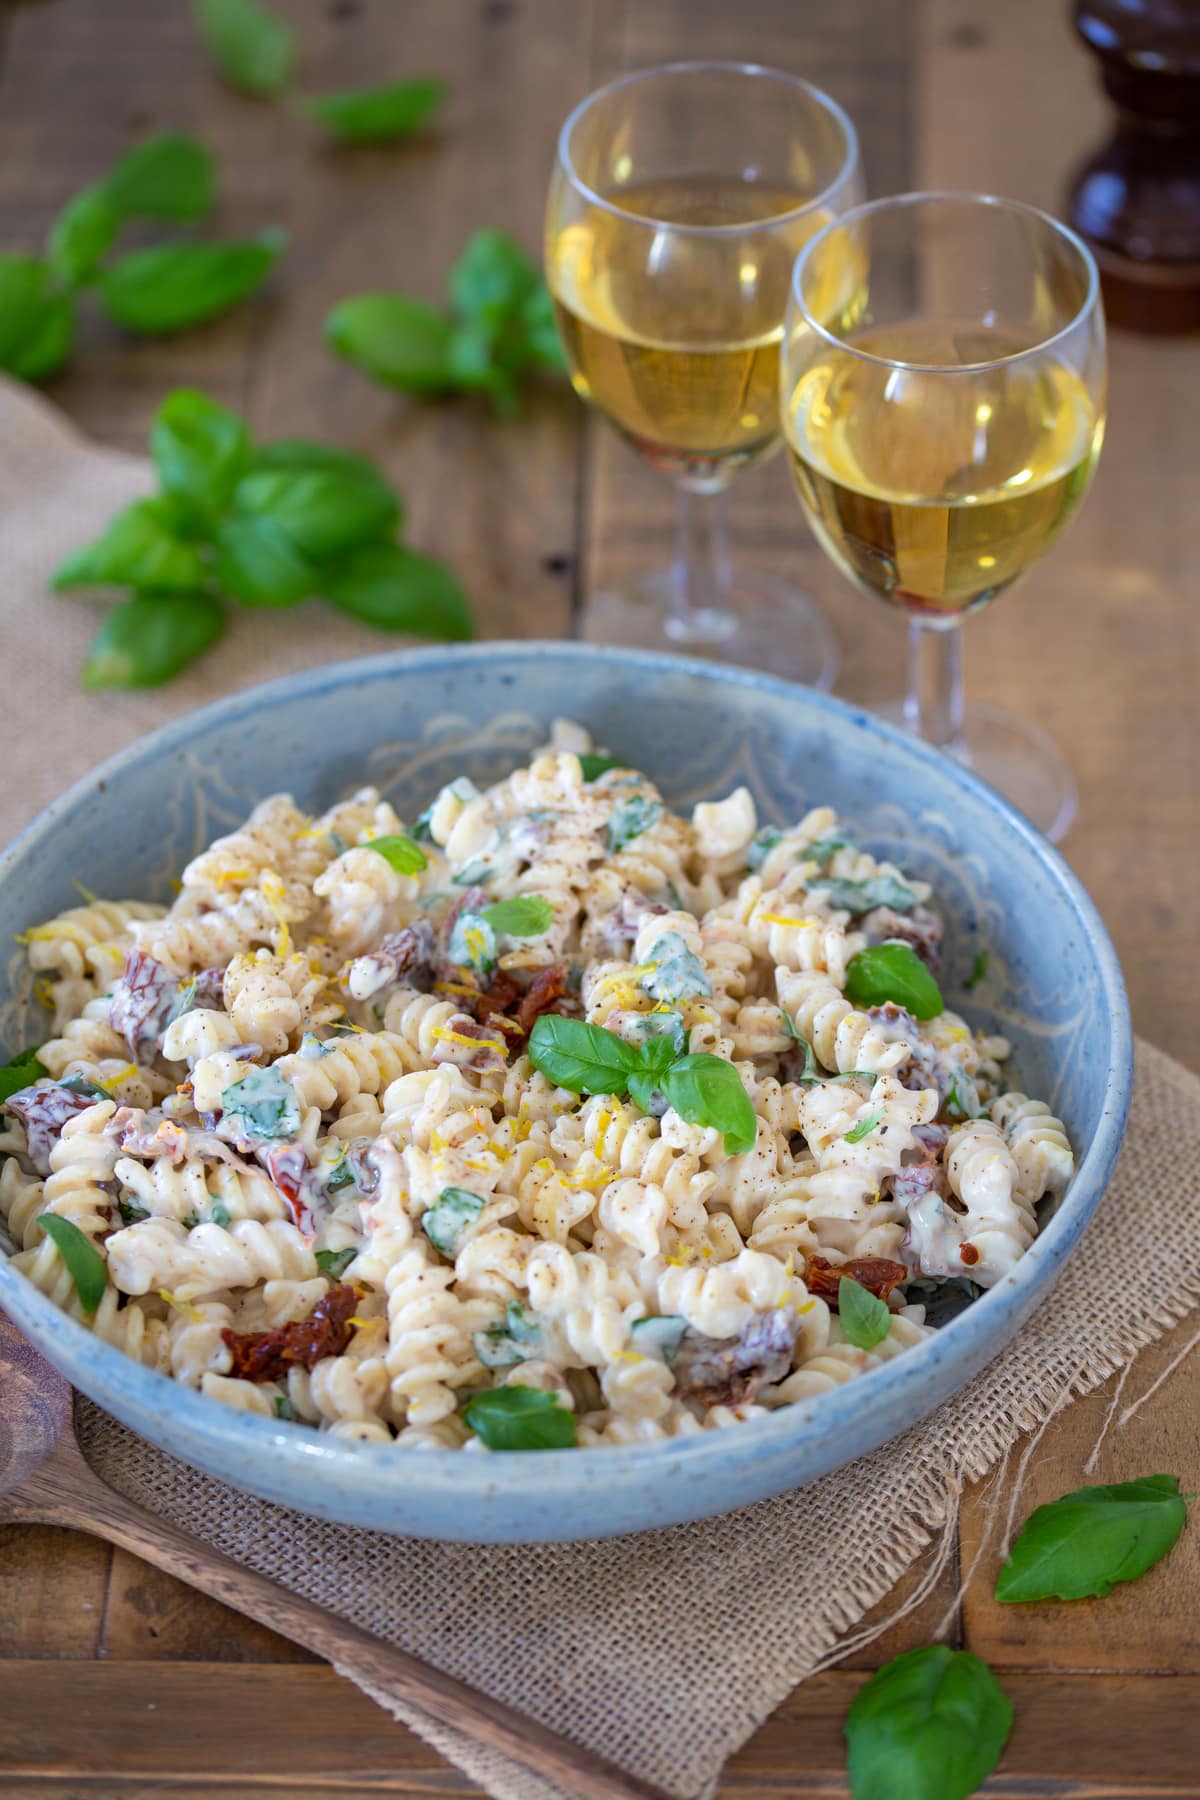 This pasta salad in a bowl, with 2 glasses of wine aside.